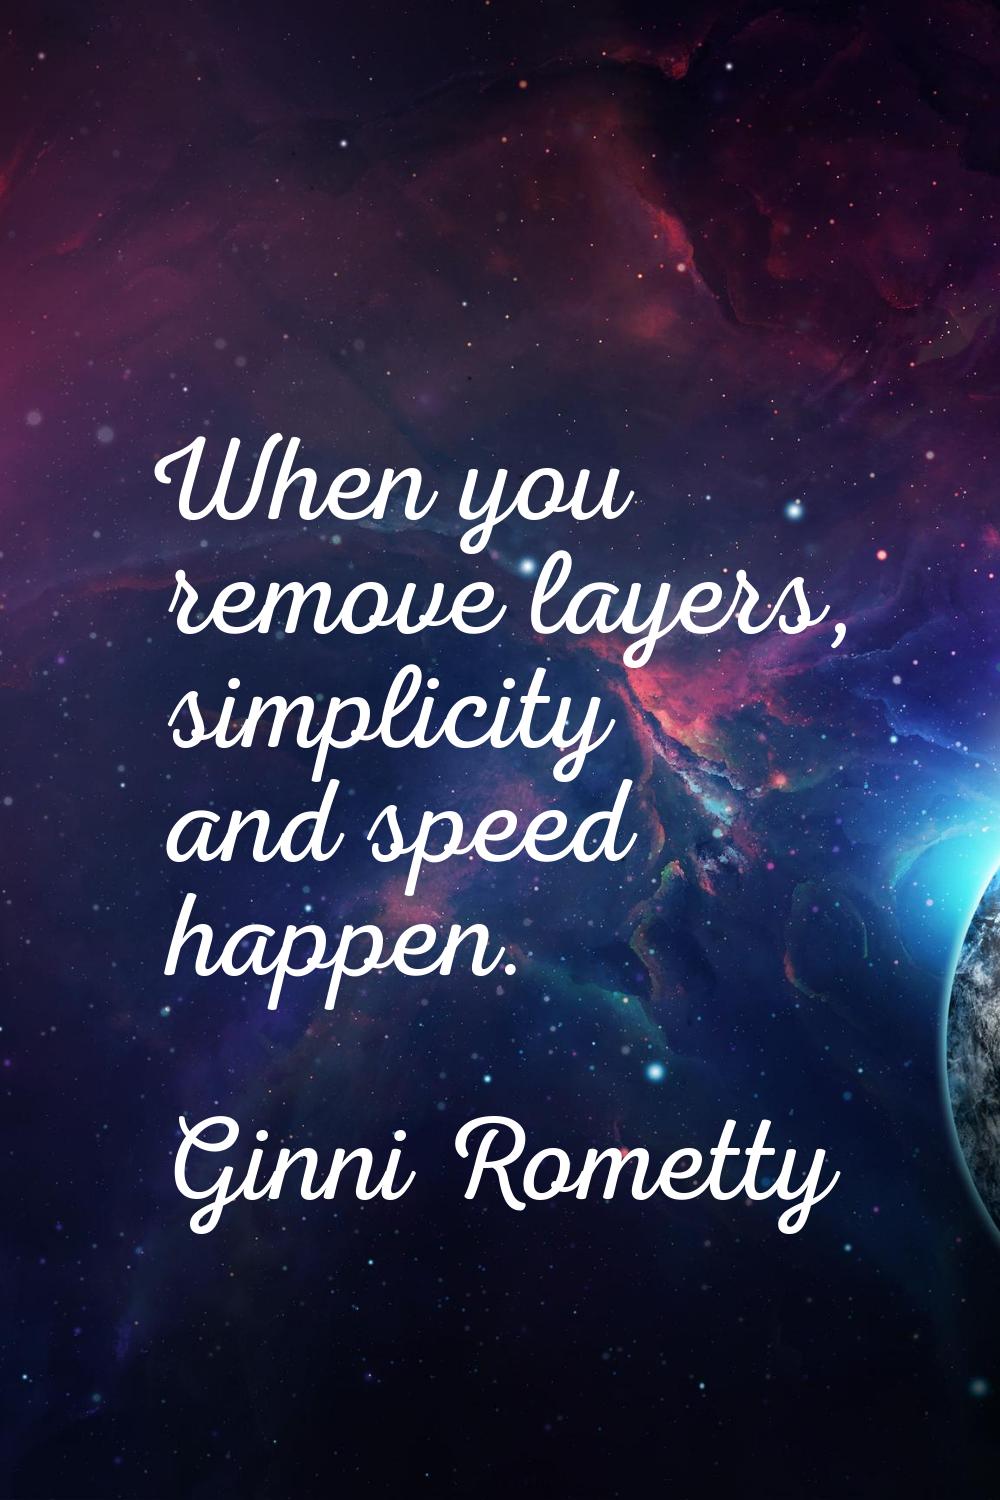 When you remove layers, simplicity and speed happen.